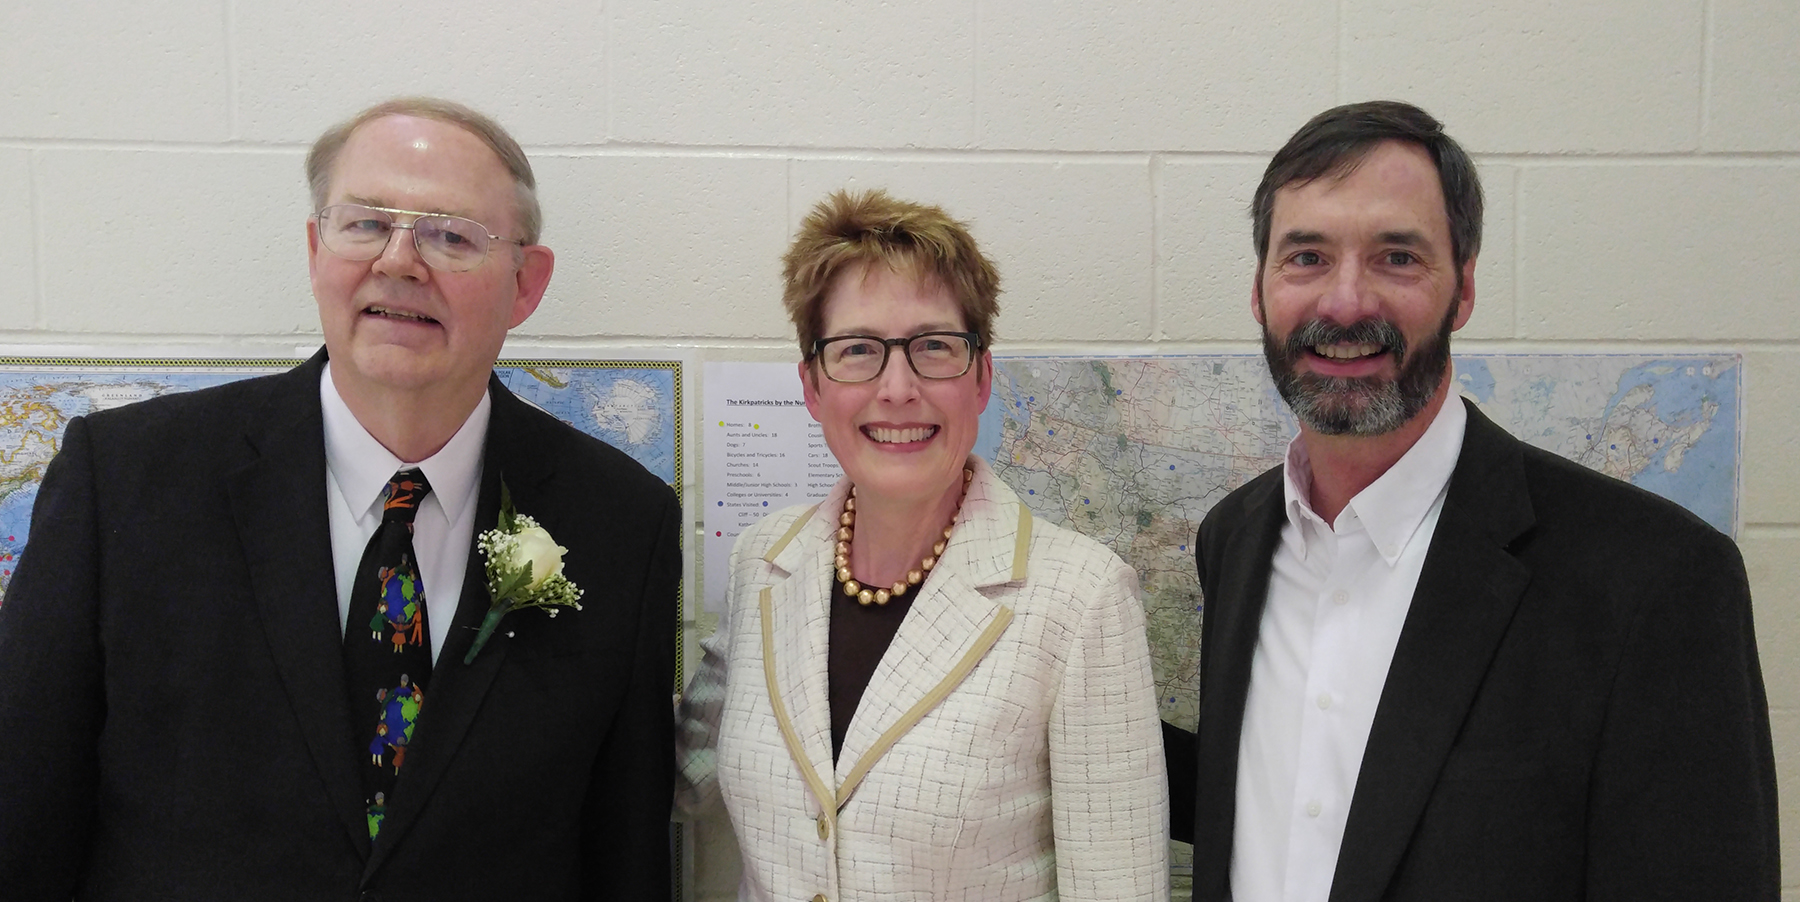 Three former directors of global mission in the Presbyterian Mission Agency: Cliff Kirkpatrick, Marian McClure Taylor and Hunter Farrell (photo provided)